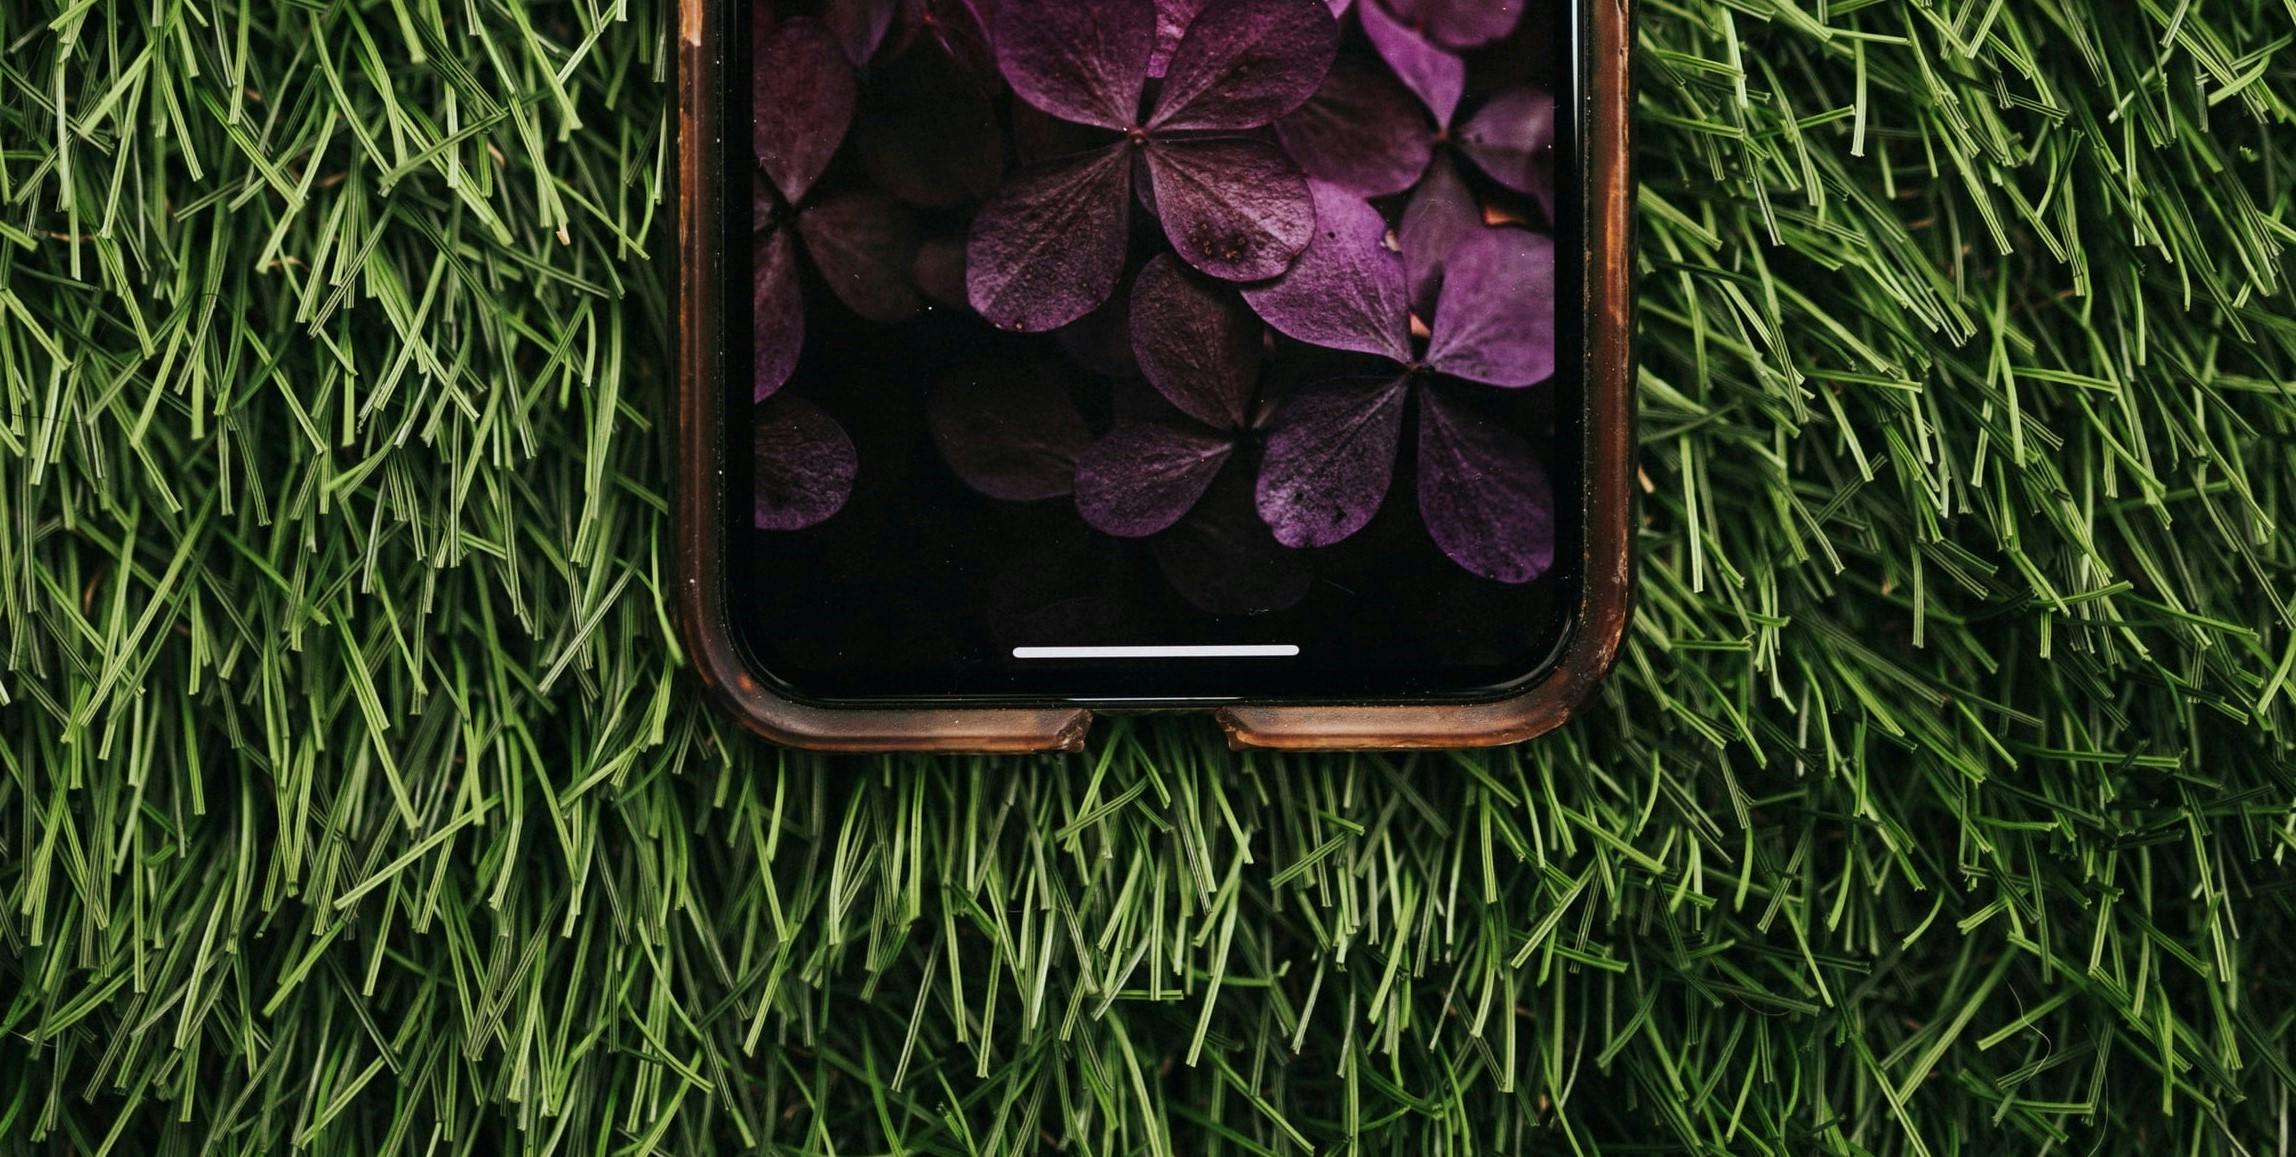 Phone on the grass